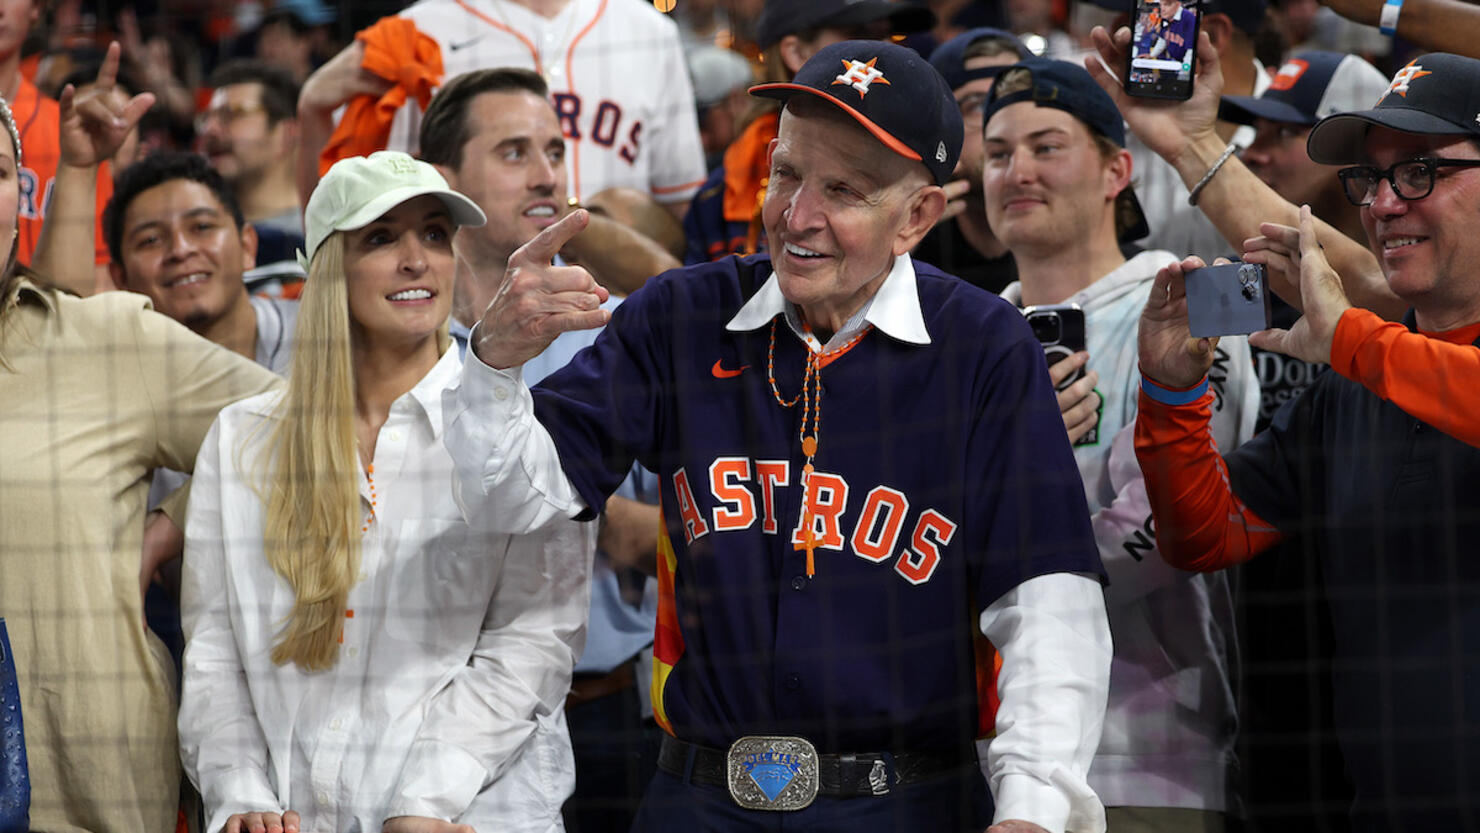 Mattress Mack' to deliver first pitch in World Series Game 6 at